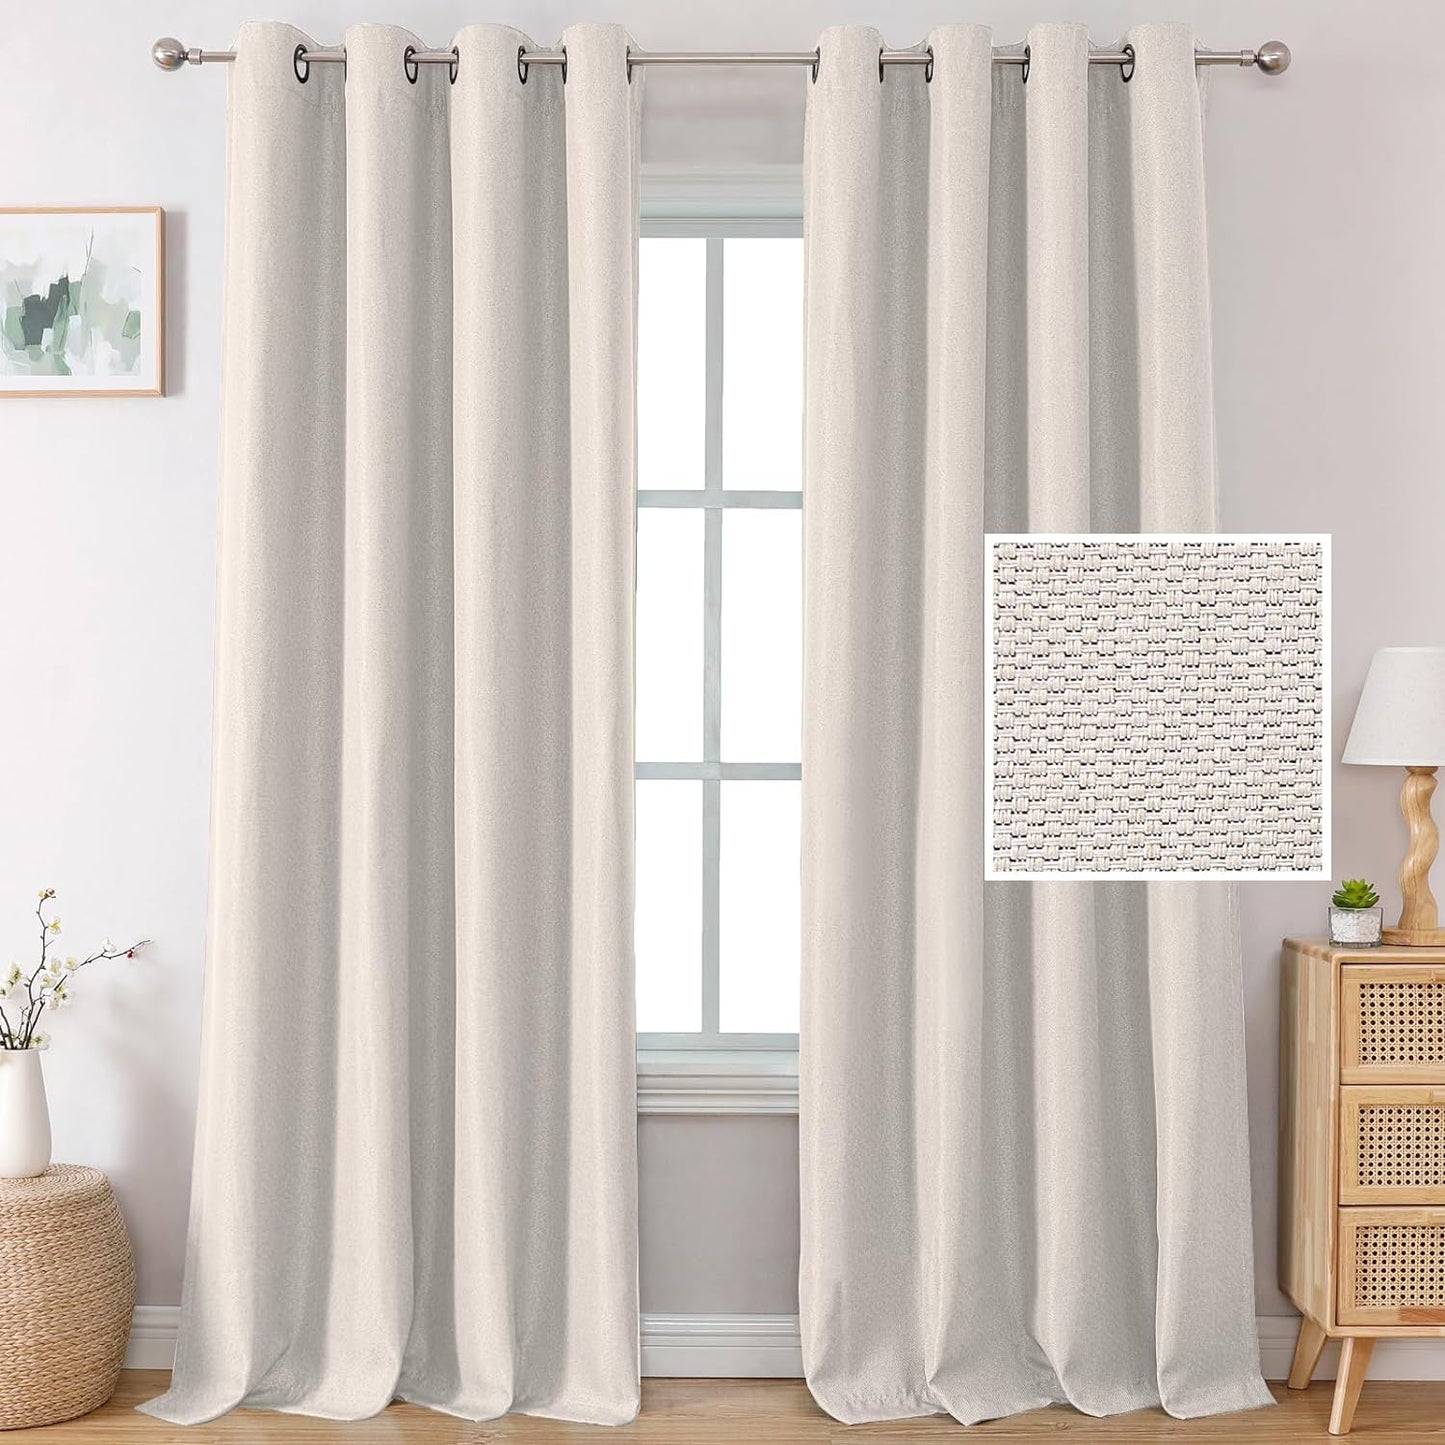 H.VERSAILTEX Linen Blackout Curtains 84 Inches Long Thermal Insulated Room Darkening Linen Curtains for Bedroom Textured Burlap Grommet Window Curtains for Living Room, Bluestone and Taupe, 2 Panels  H.VERSAILTEX Ivory 52"W X 96"L 